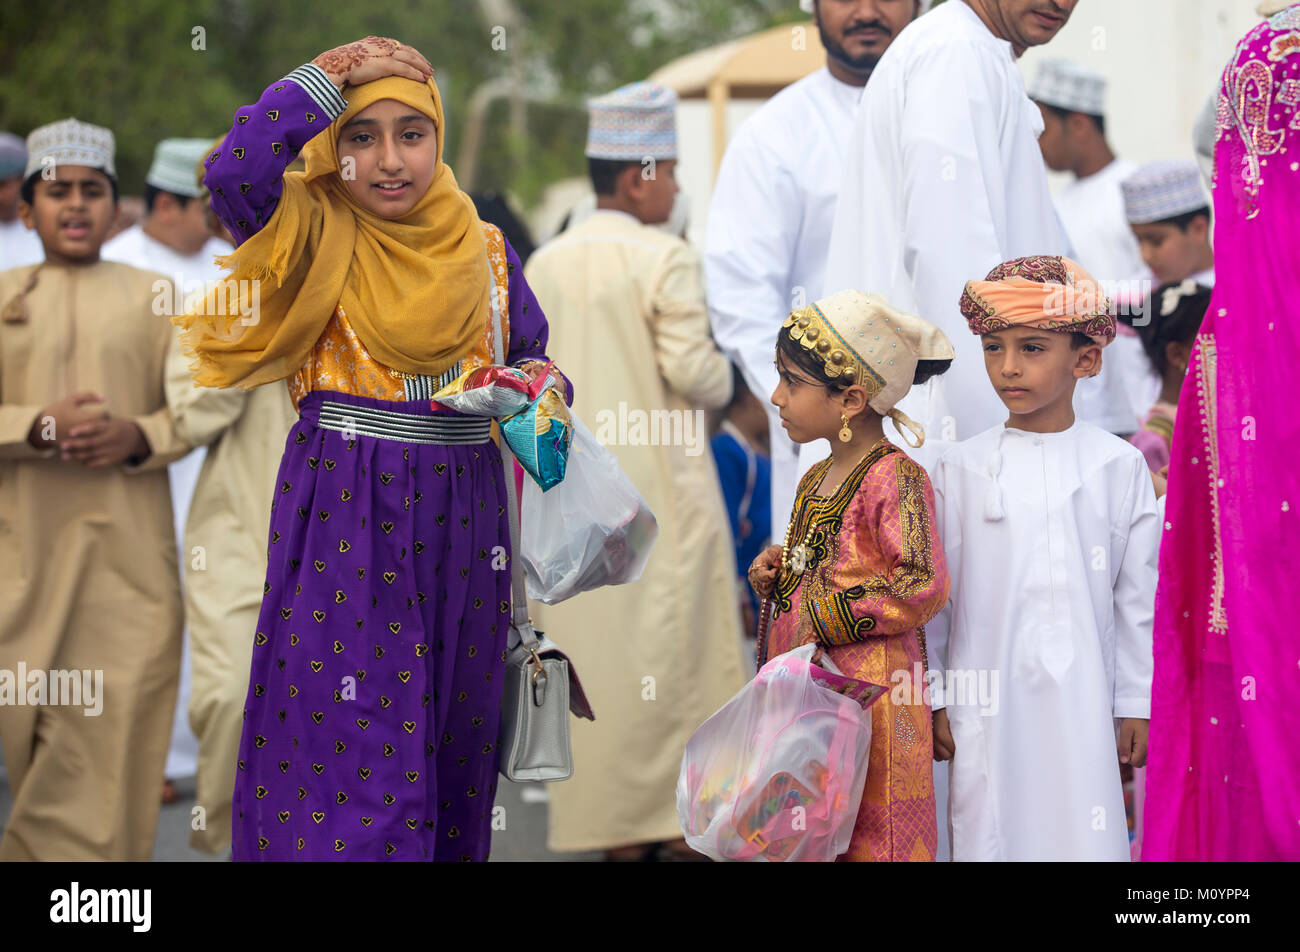 Nizwa, Oman - June 26th 2017: people at a toy market on a day of Eid al Fitr Stock Photo